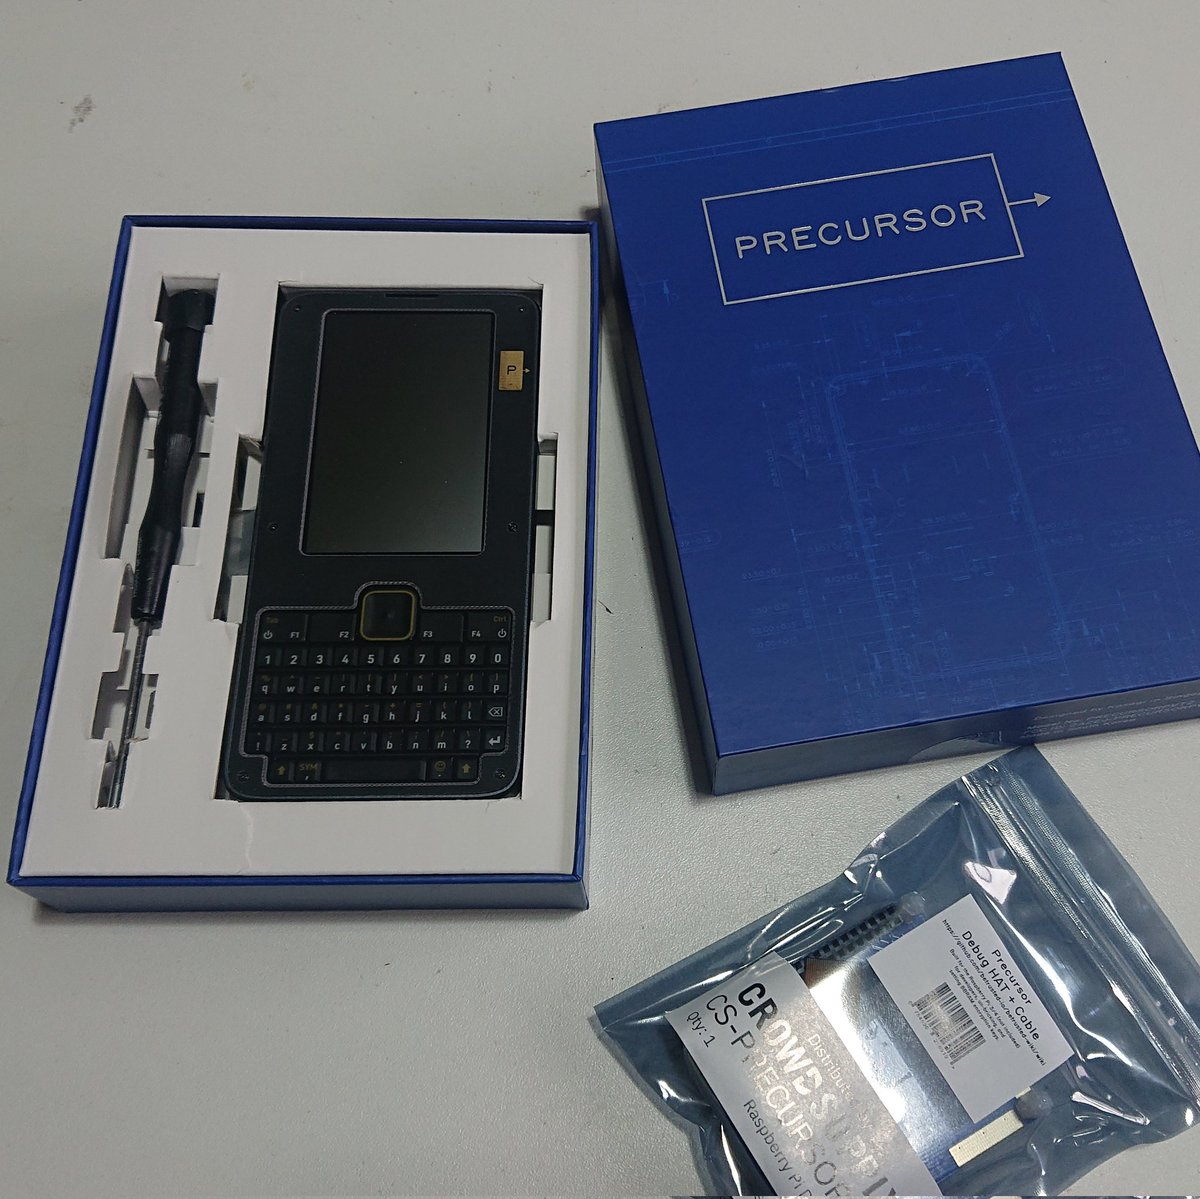 A box labelled 'Precursor' is open on a table revealing a device with a screen and qwerty keyboard that looks like a Blackberry phone. Next to it is a small screwdriver. Below the box is a small circuit board in an anti-static bag